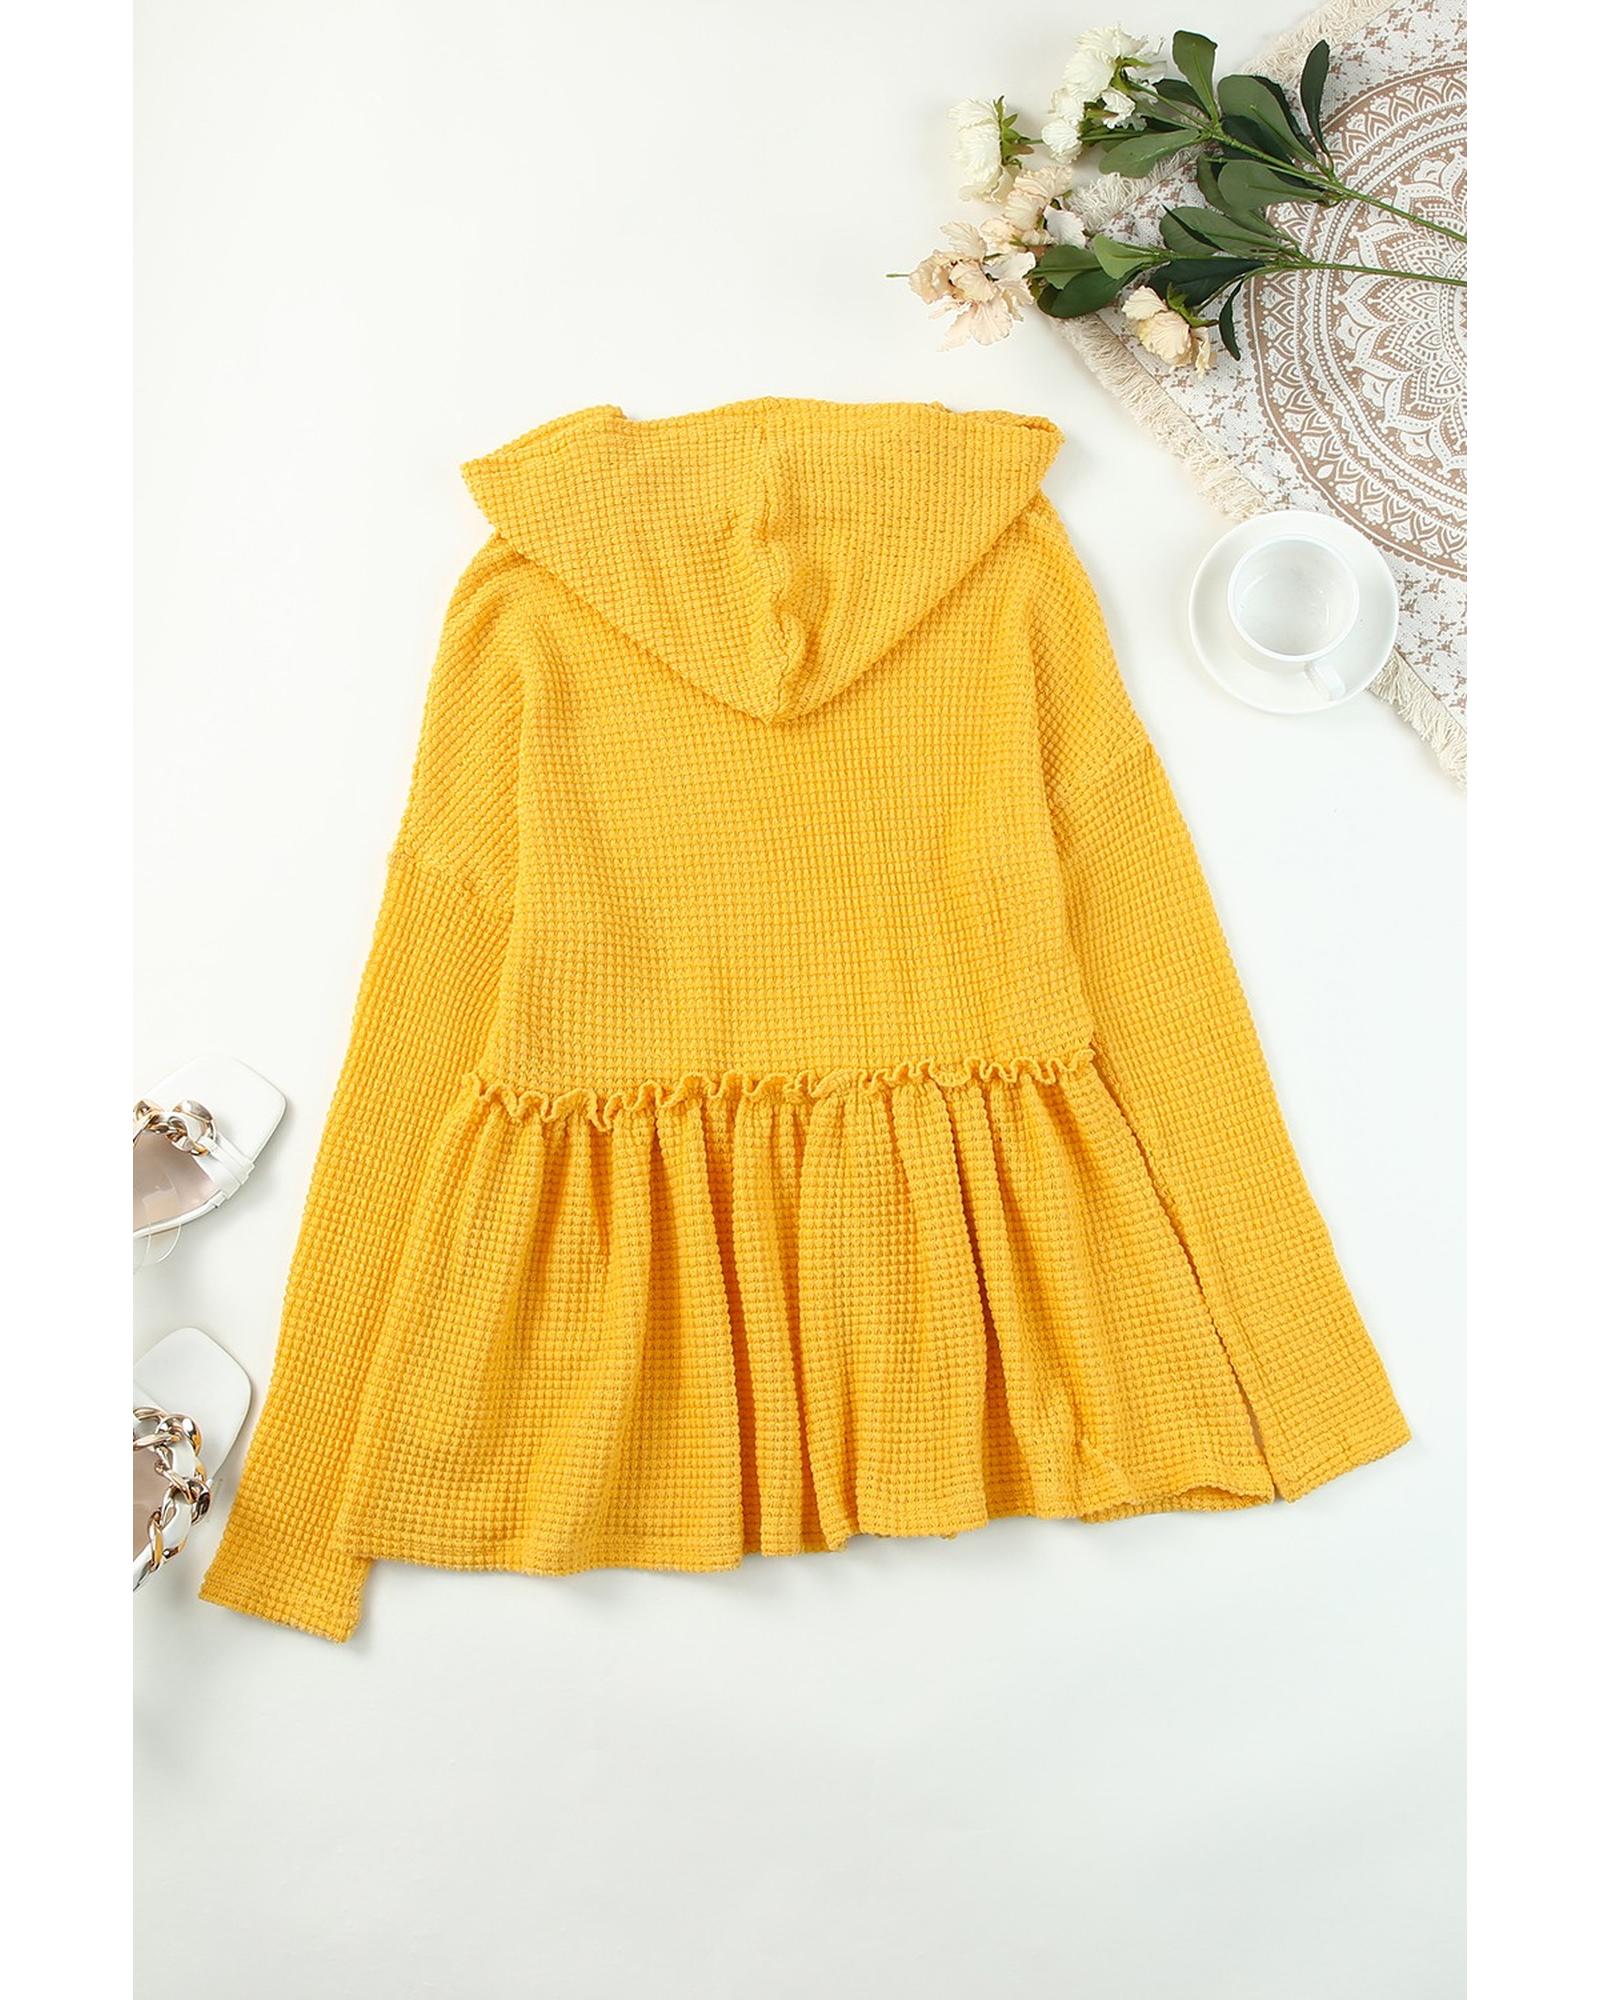 Hooded Flowy Top with Frill - L